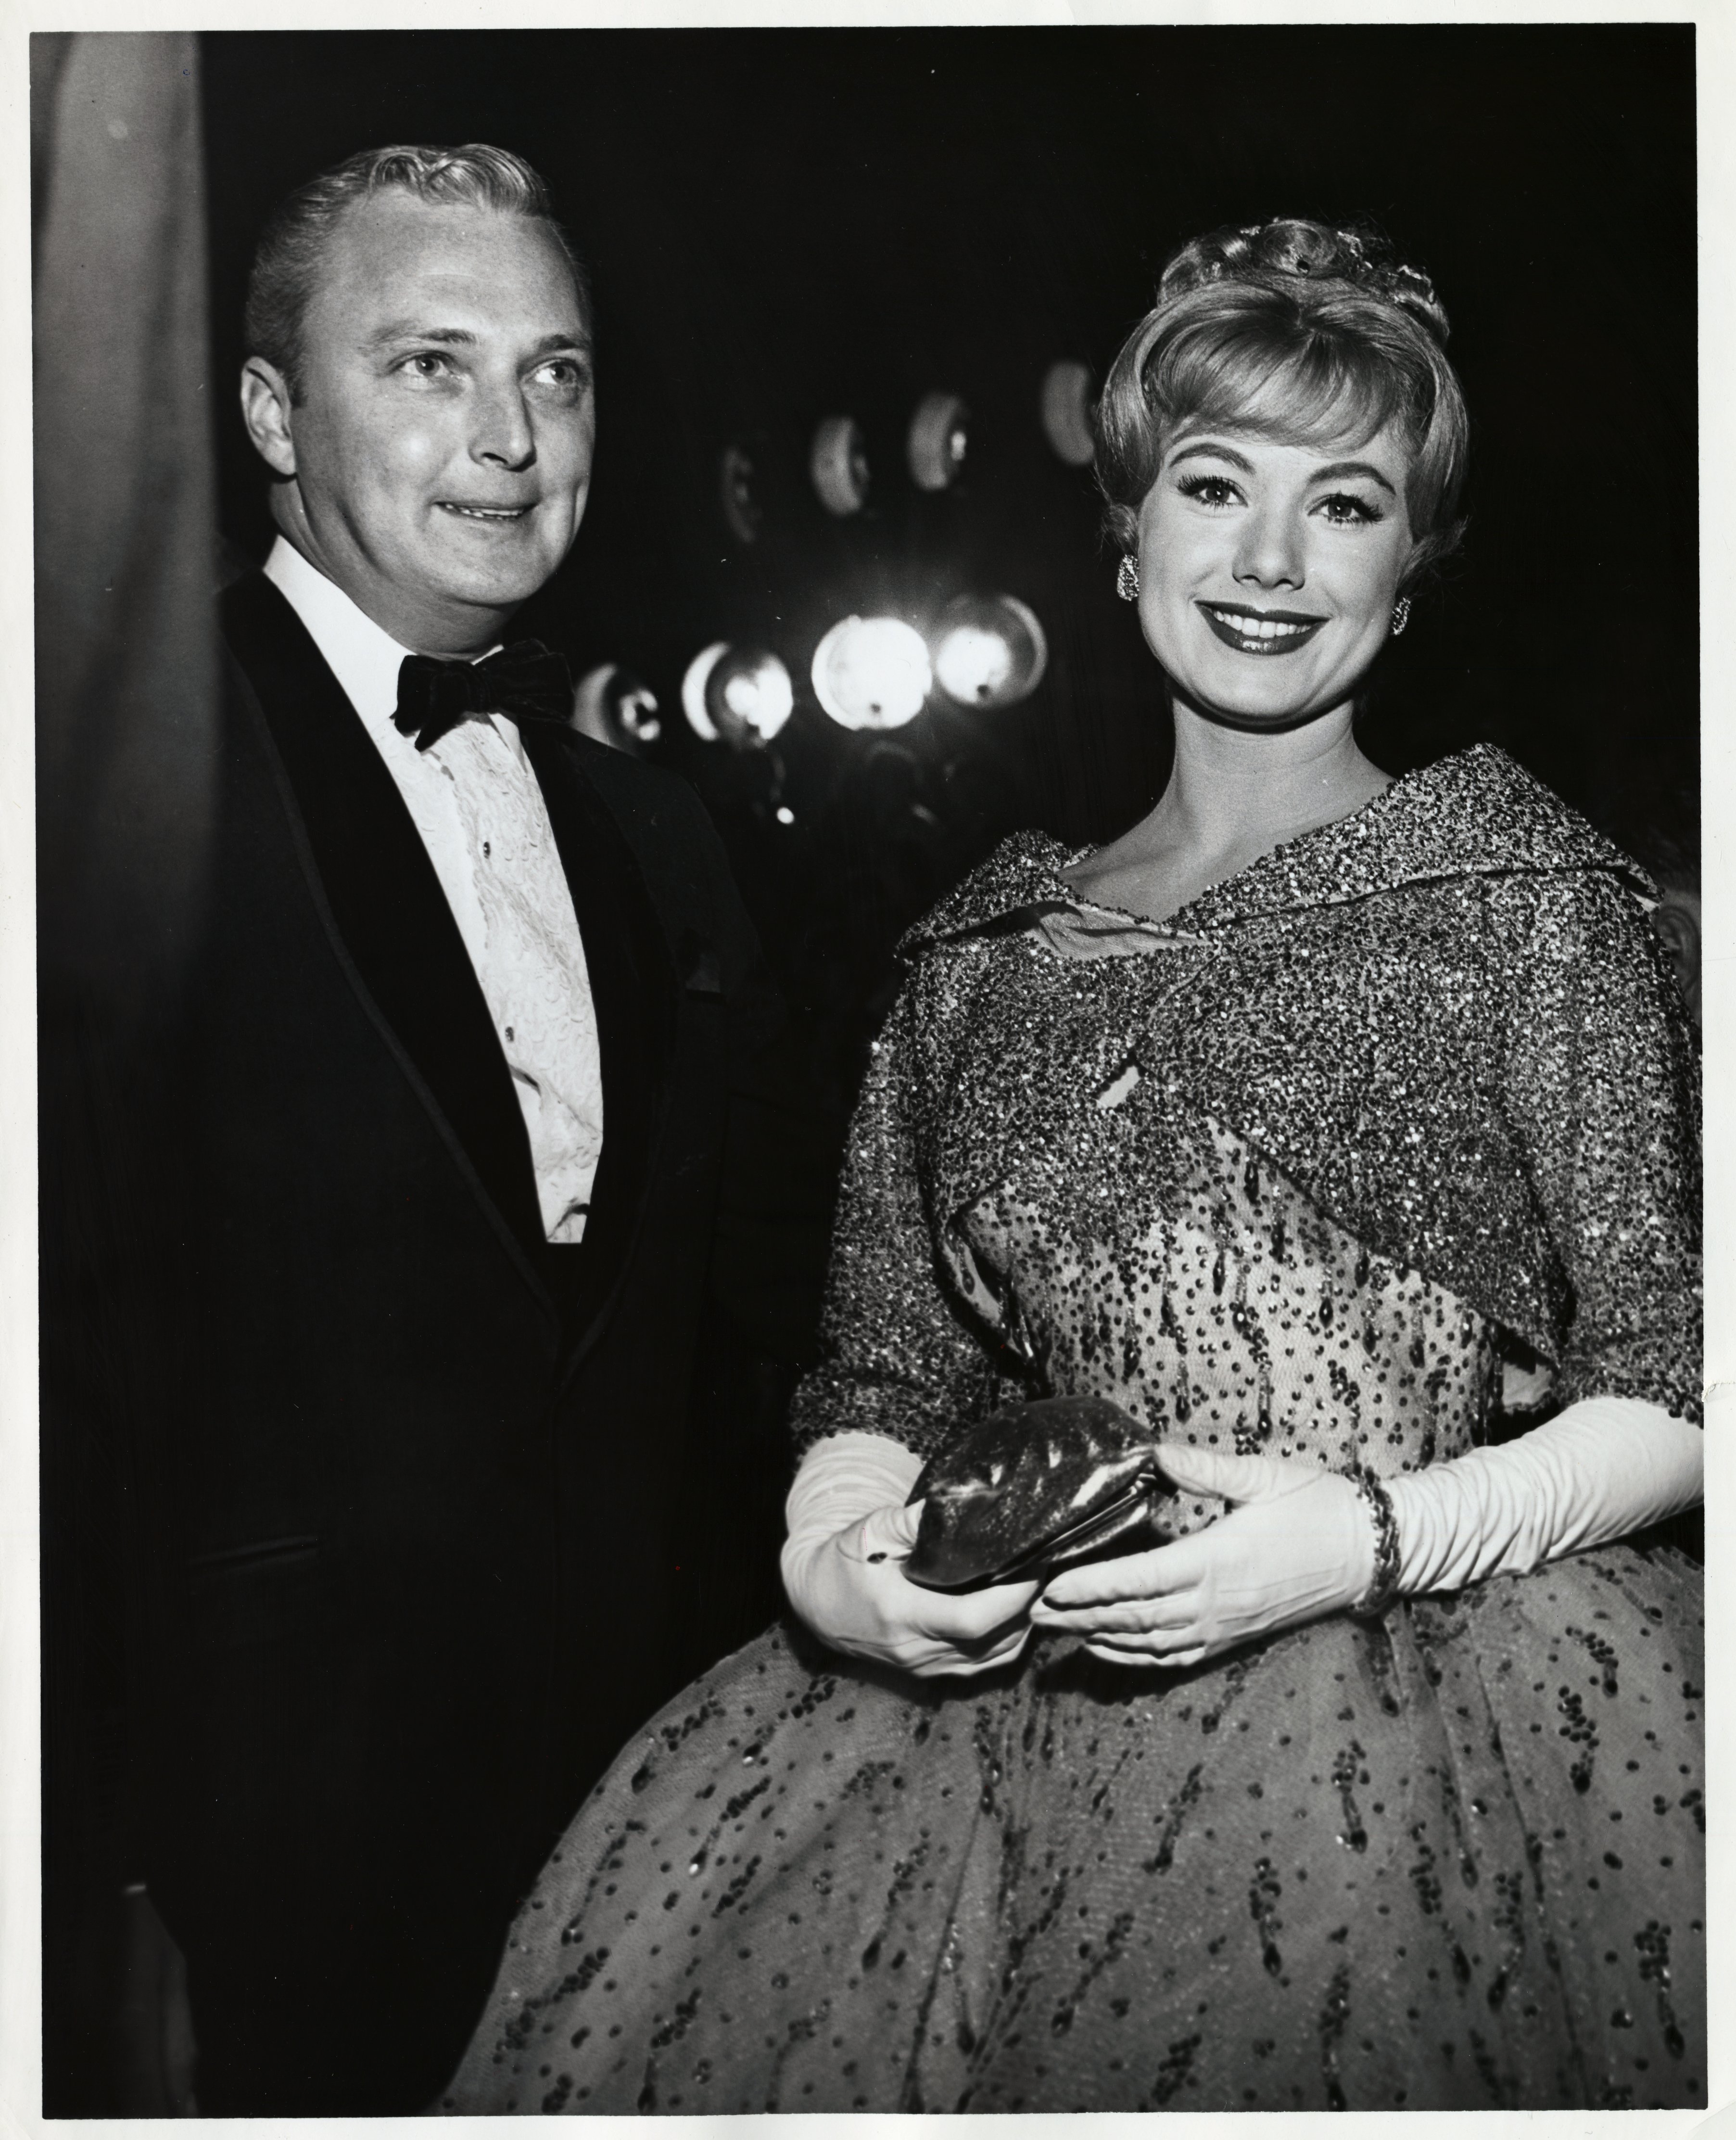 Jack Cassidy and Shirley Jones posing for a photo, circa 1961. | Source: Bettmann/Getty Images